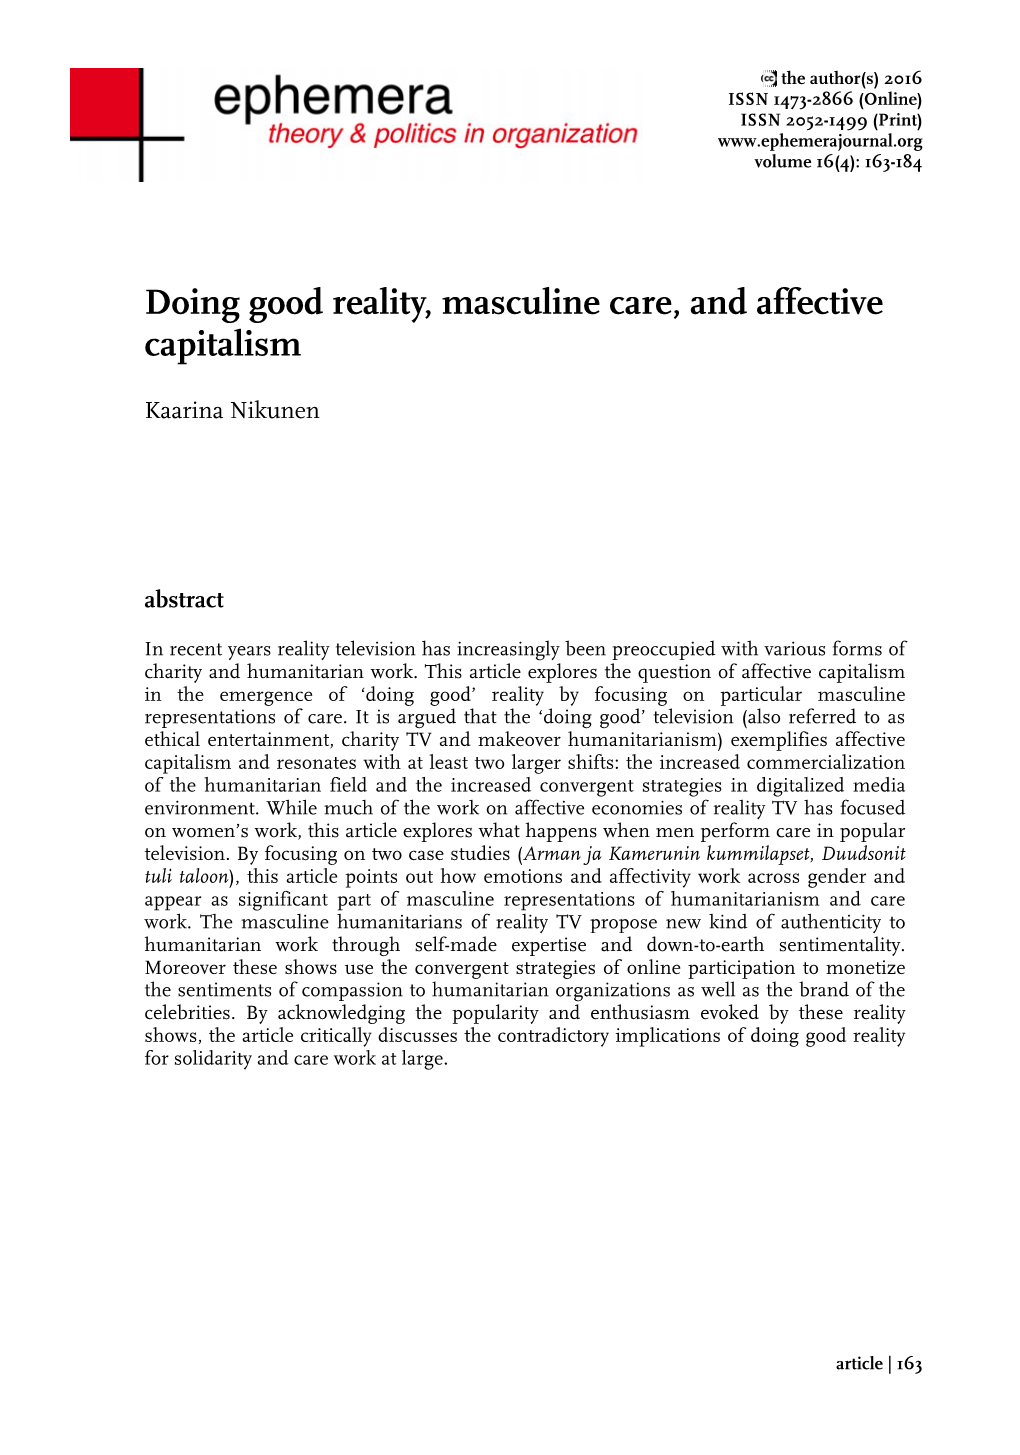 Doing Good Reality, Masculine Care, and Affective Capitalism